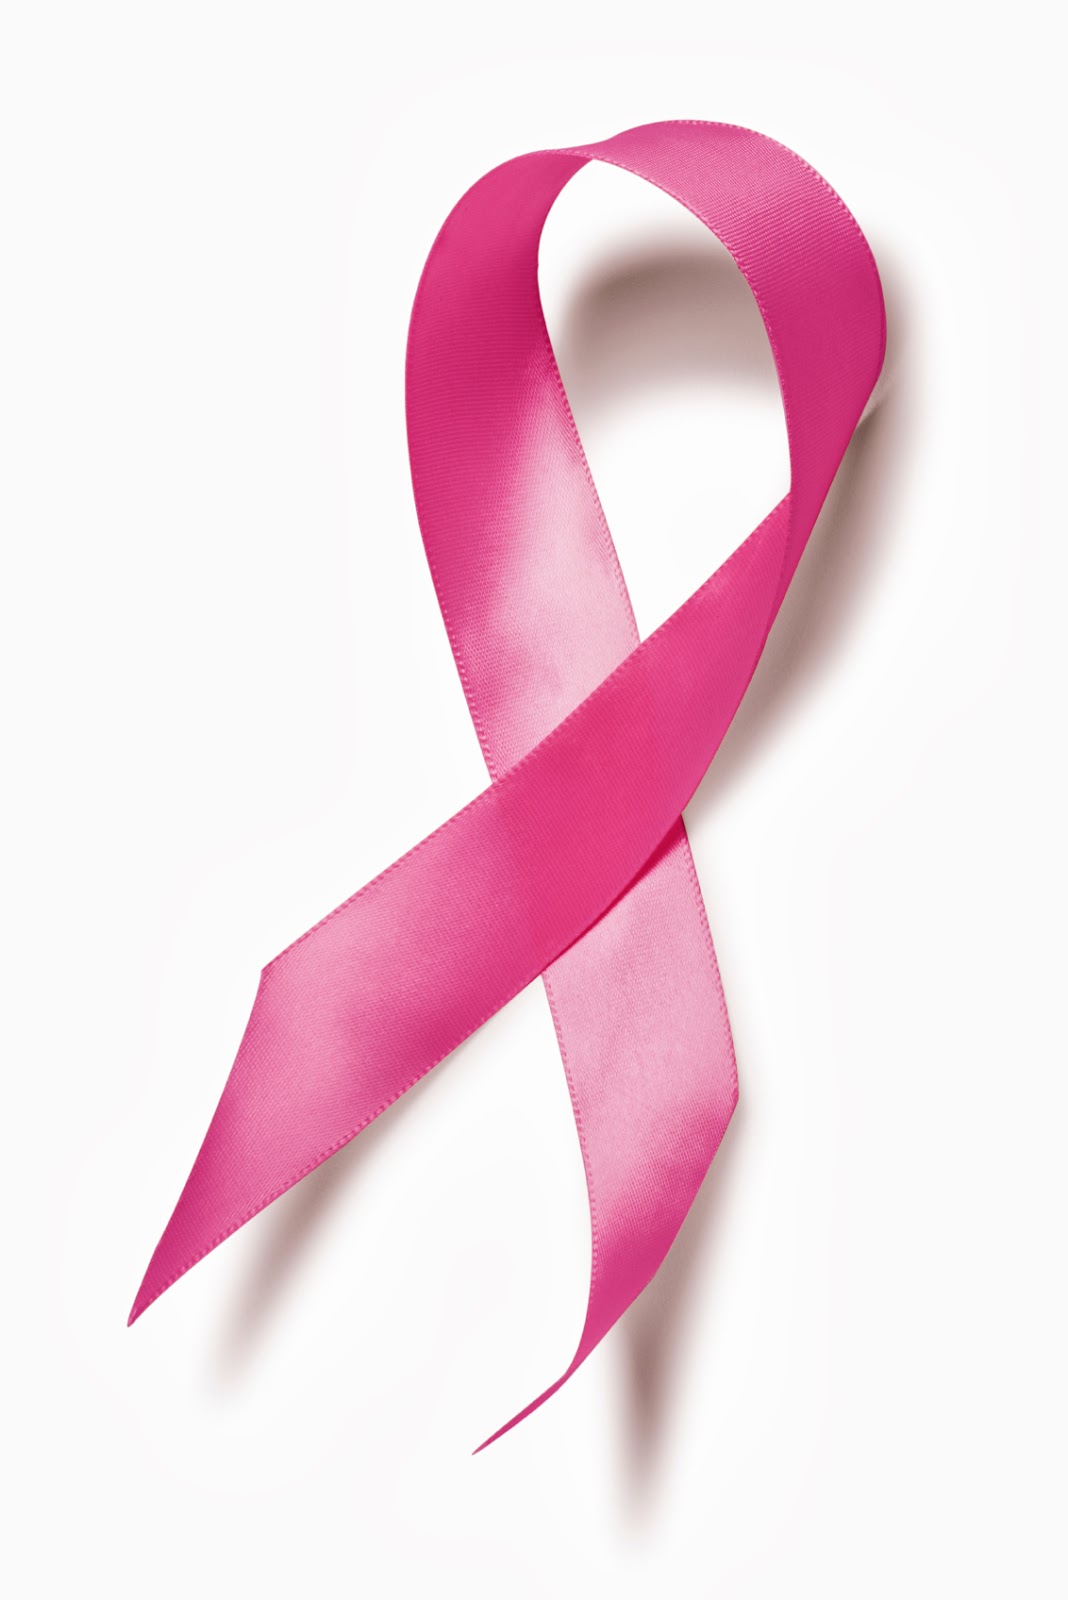 pink-ribbon-template-clipart-best